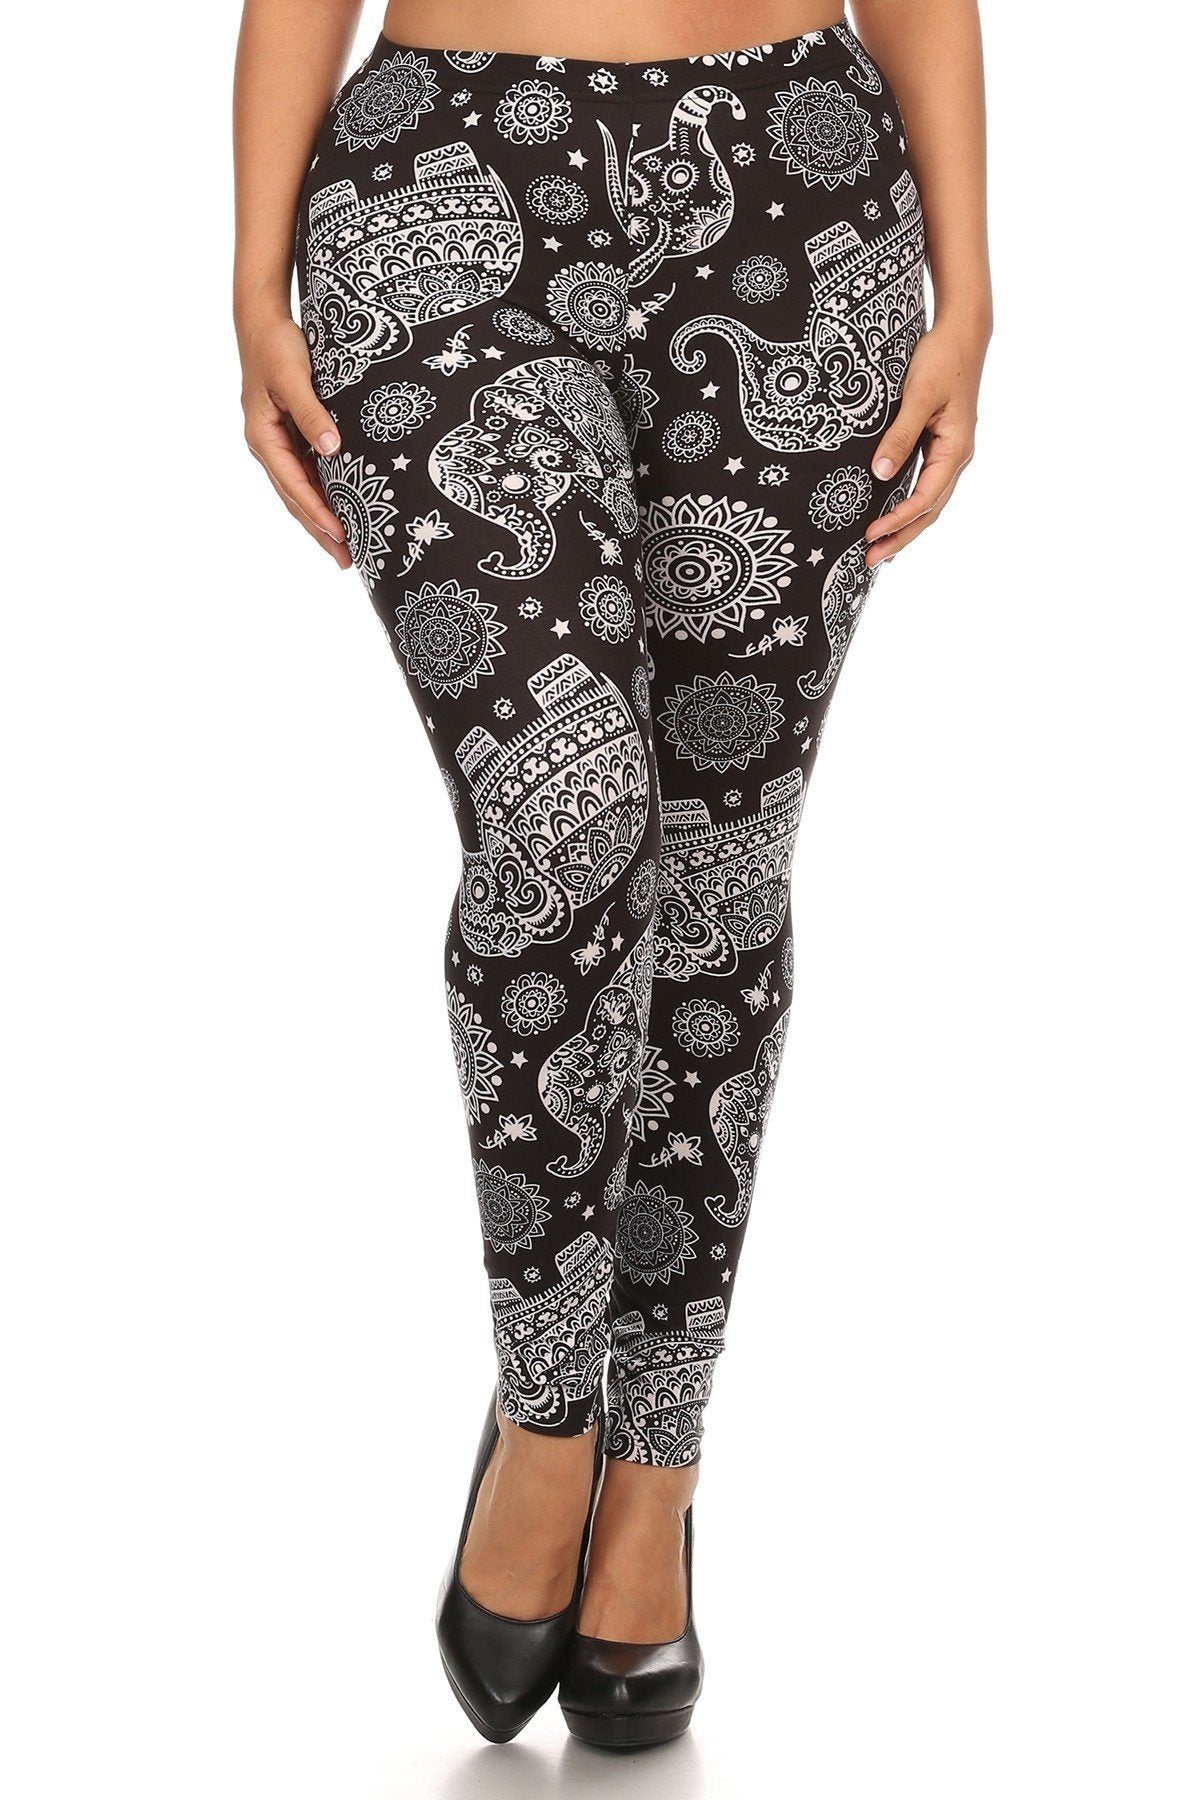 Plus Size Elephant Print, Full Length Leggings In A Slim Fitting Style With A Banded High Waist